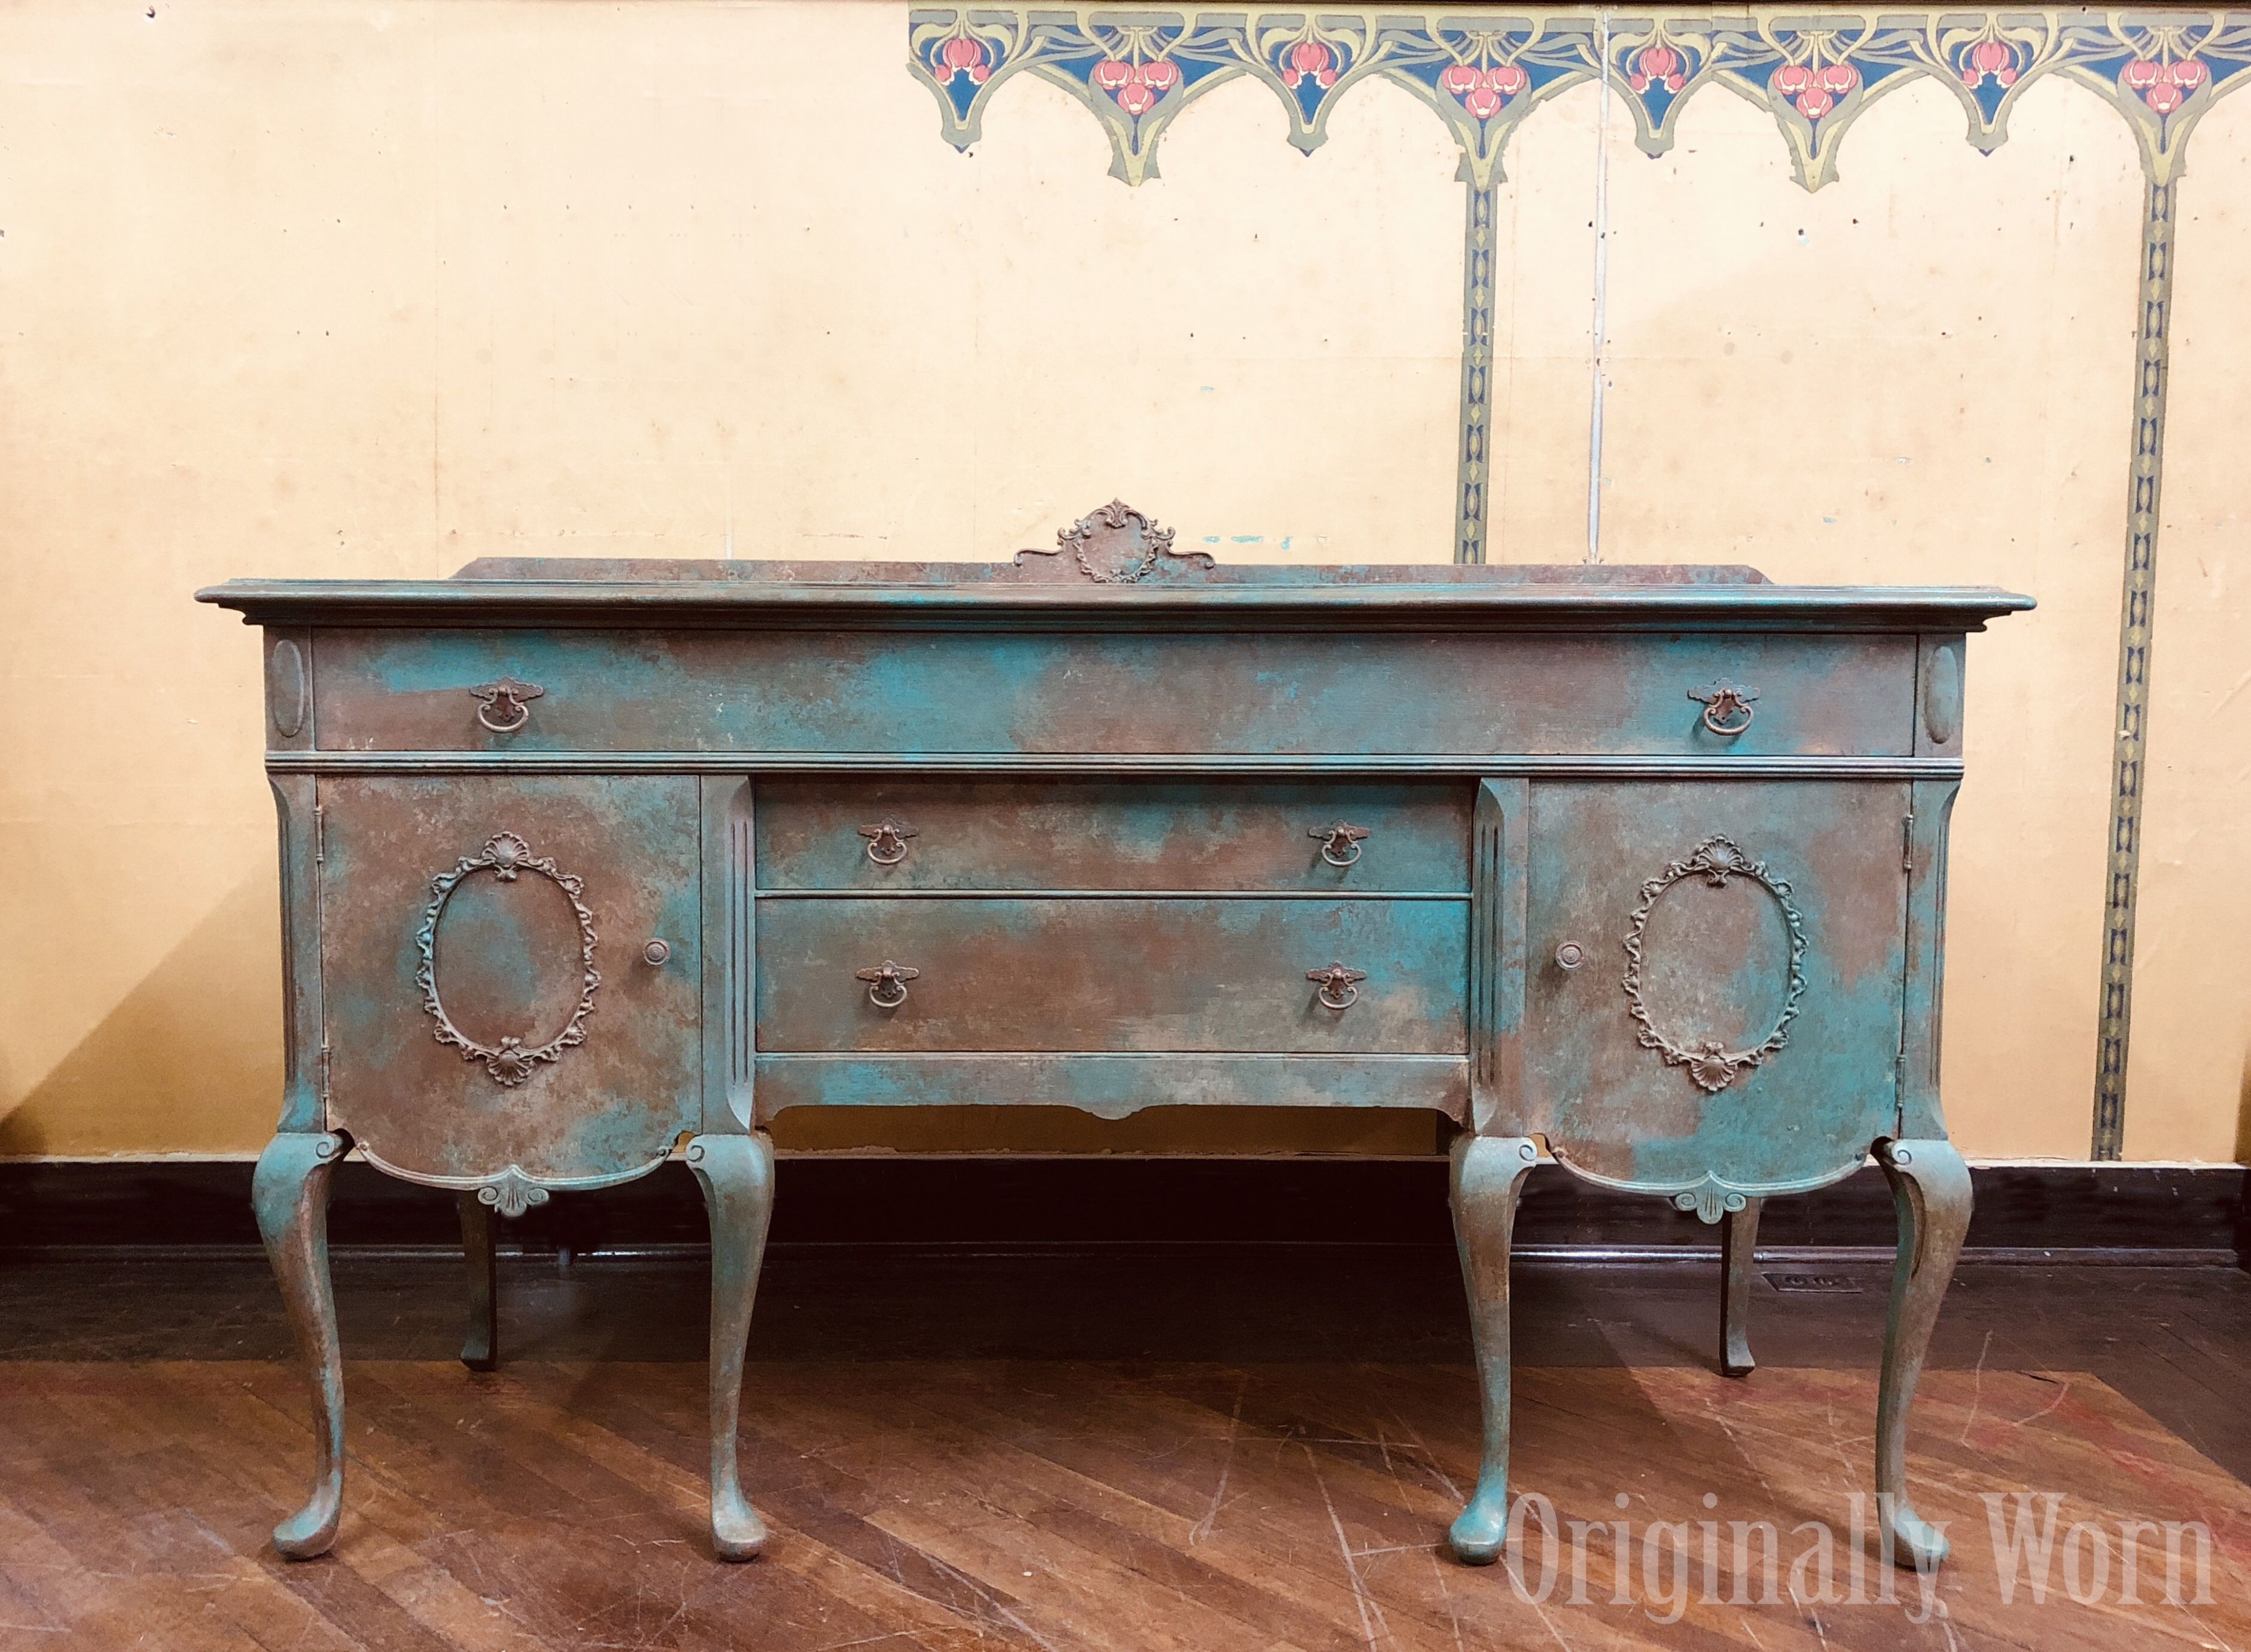 Verdigris Rust Patina Buffet Done With Annie Sloan Chalk Paint By ..